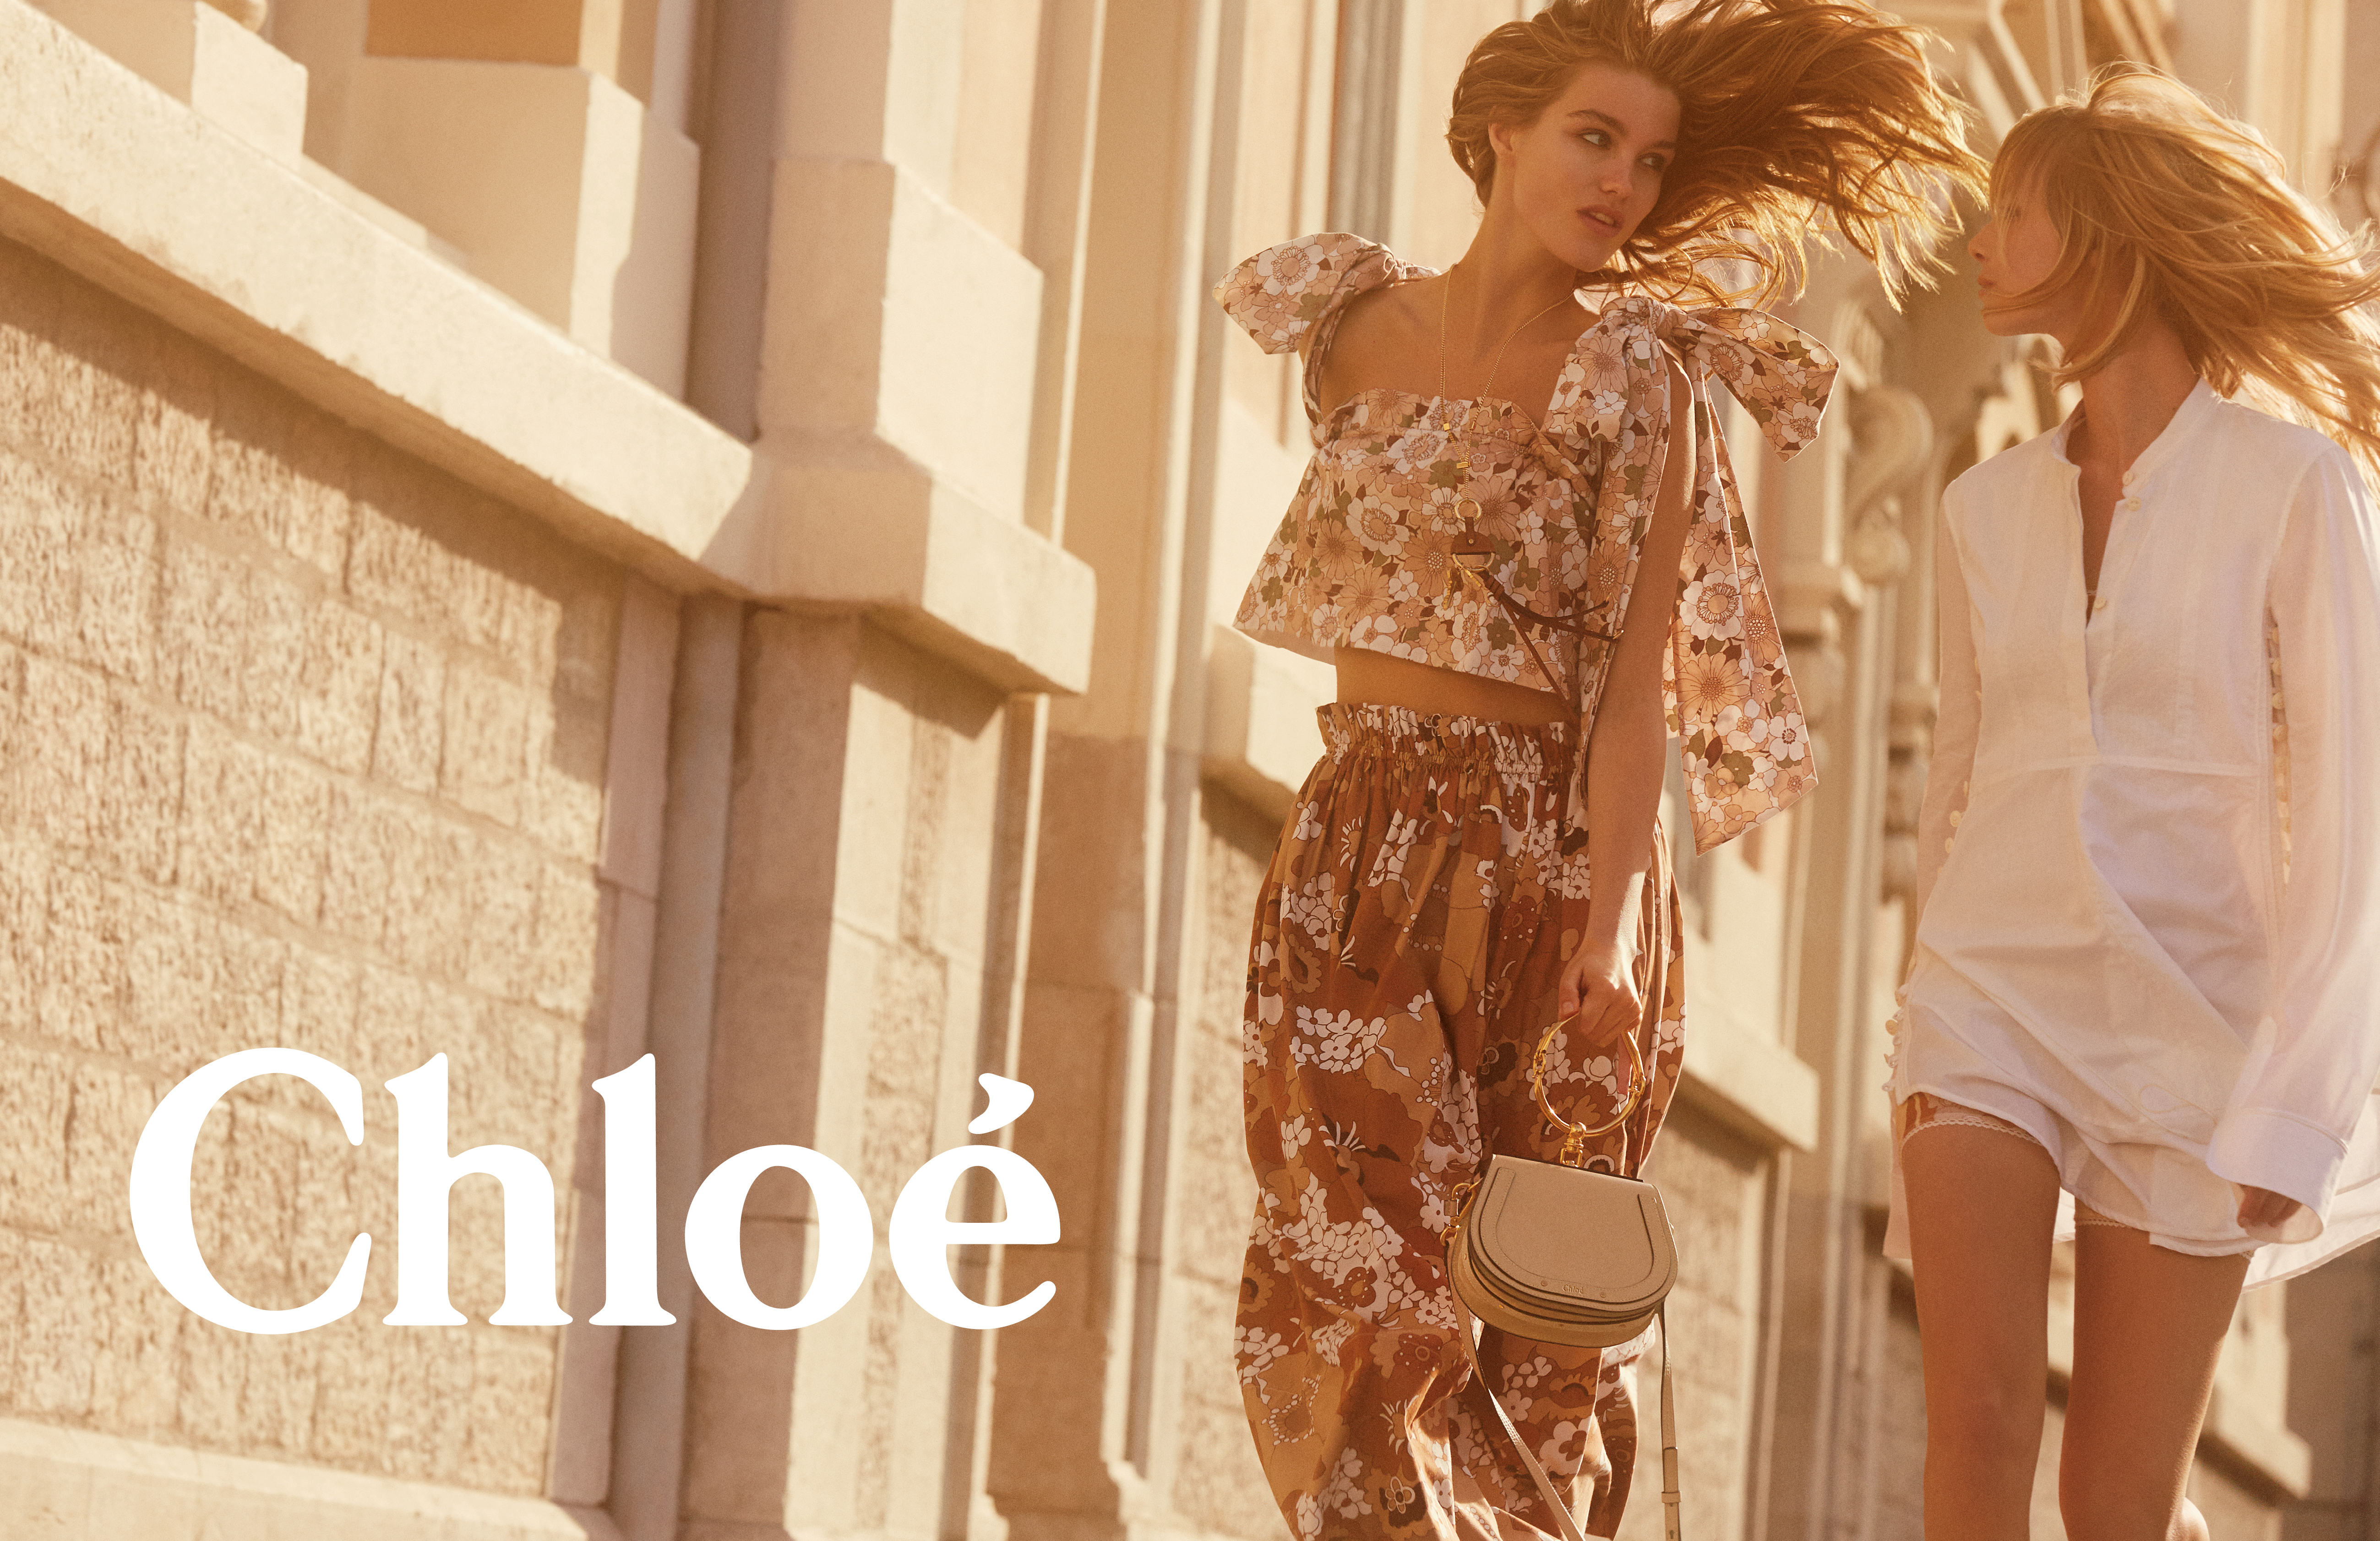 Chloé Unveils Spring/Summer 2017 Ad Campaign - Daily Front Row